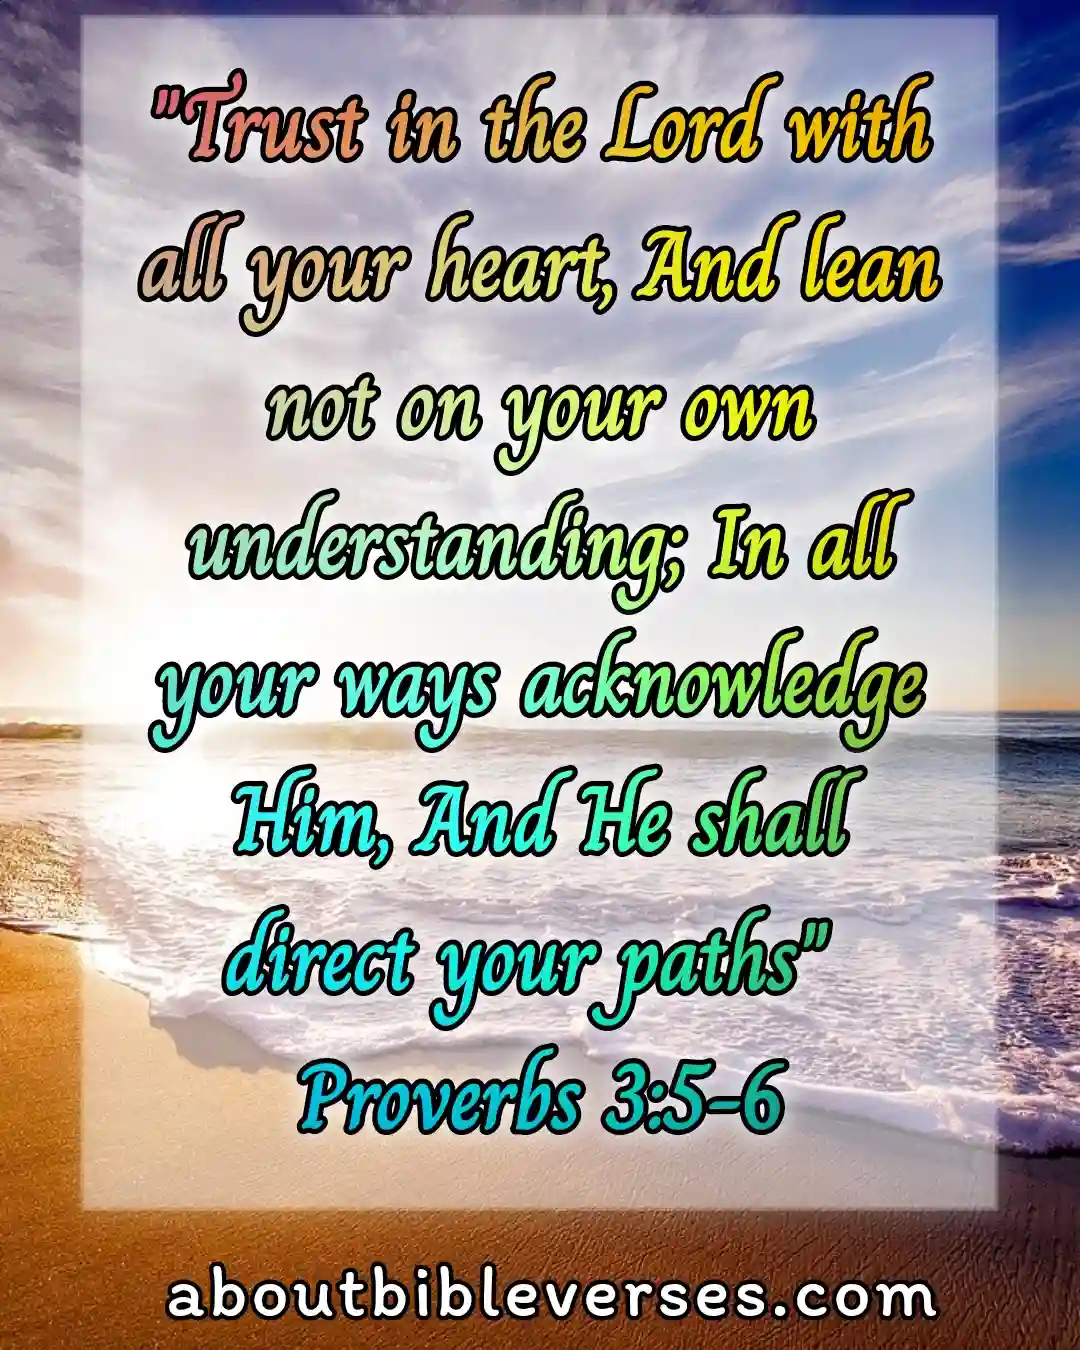 bible verses about your soul and heart (Proverbs 3:5-6)